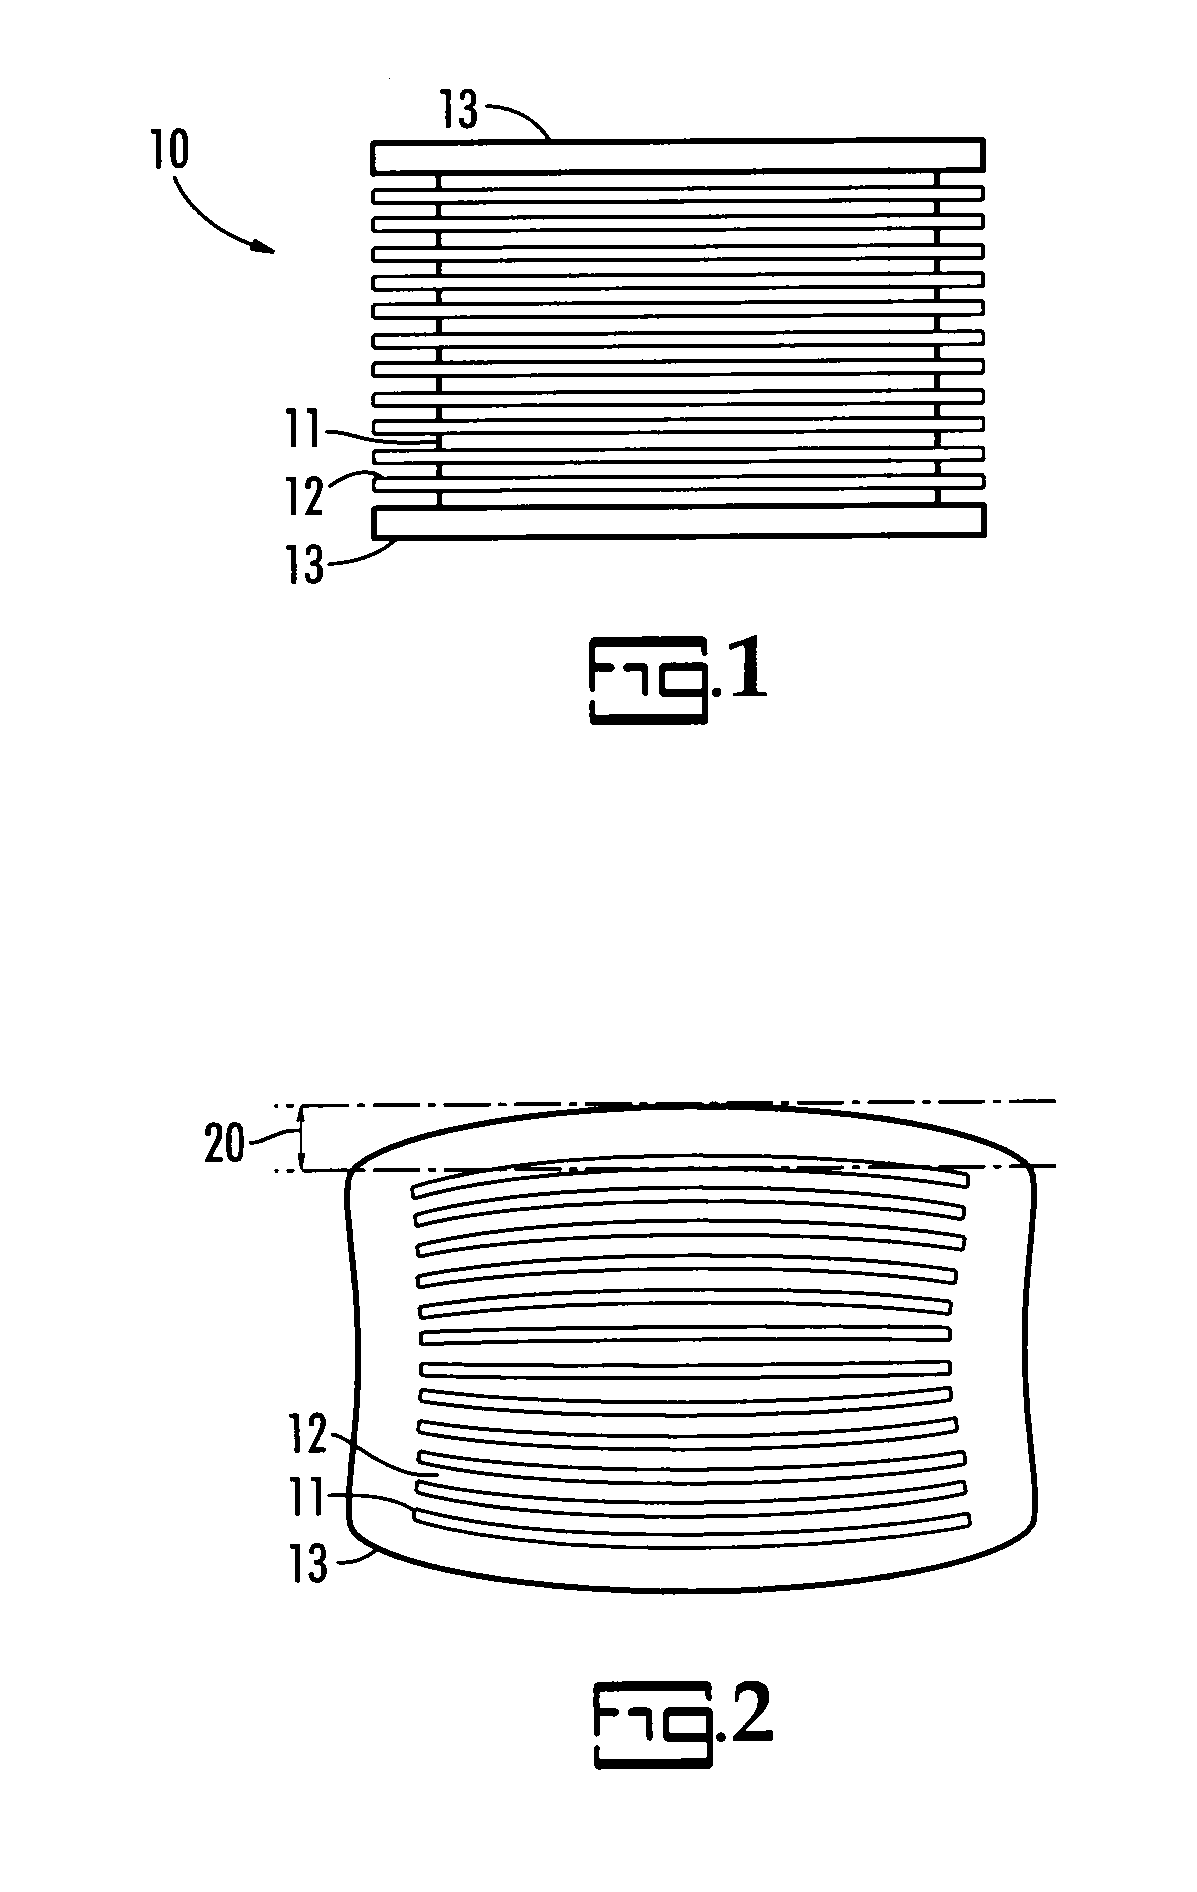 Method of attaching an electronic device to an mlcc having a curved surface